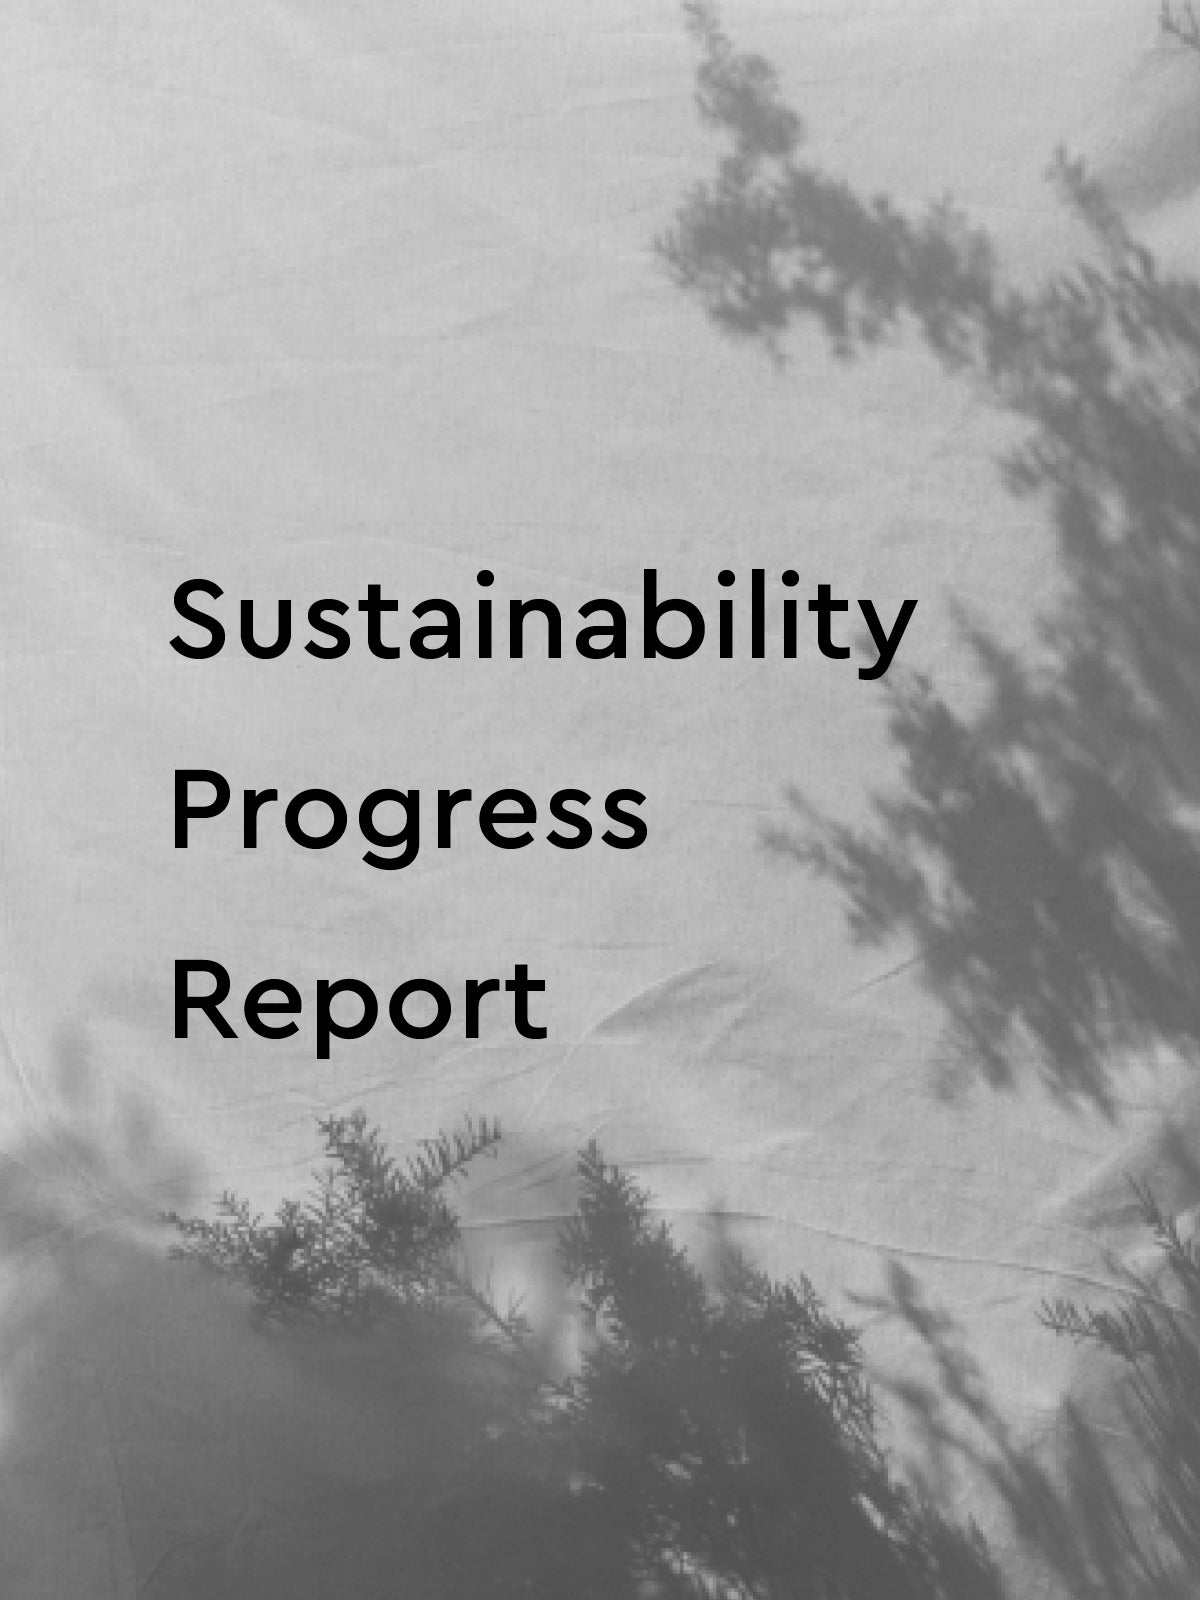 FROM JULIETTE / OUR FIRST SUSTAINABILITY PROGRESS REPORT